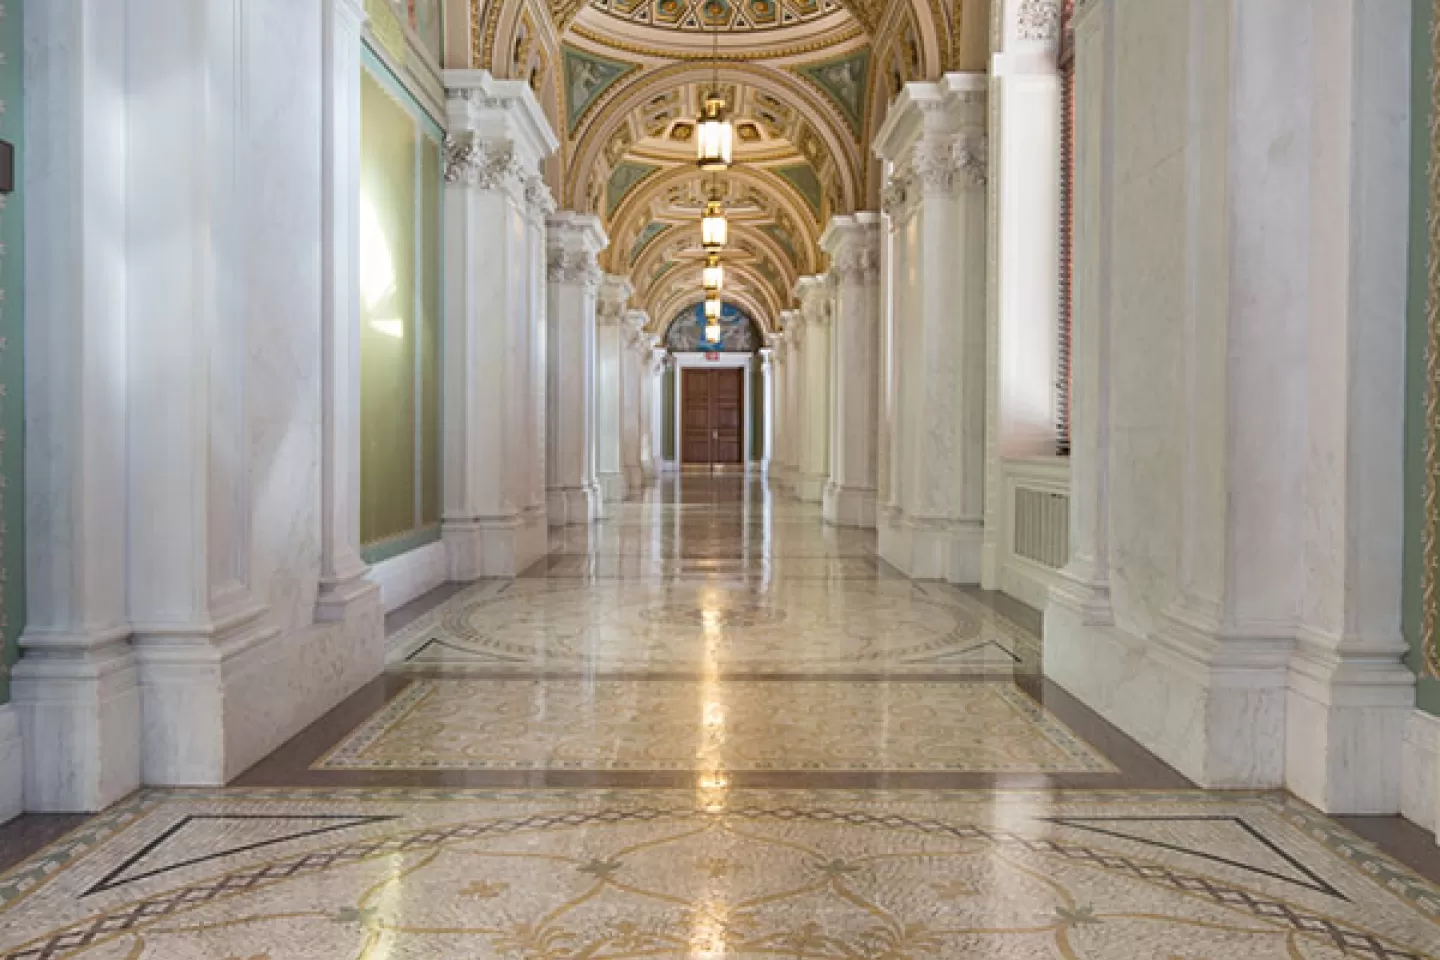 A hallway in the Library of Congress Thomas Jefferson Building with ornate walls, ceiling and floor.